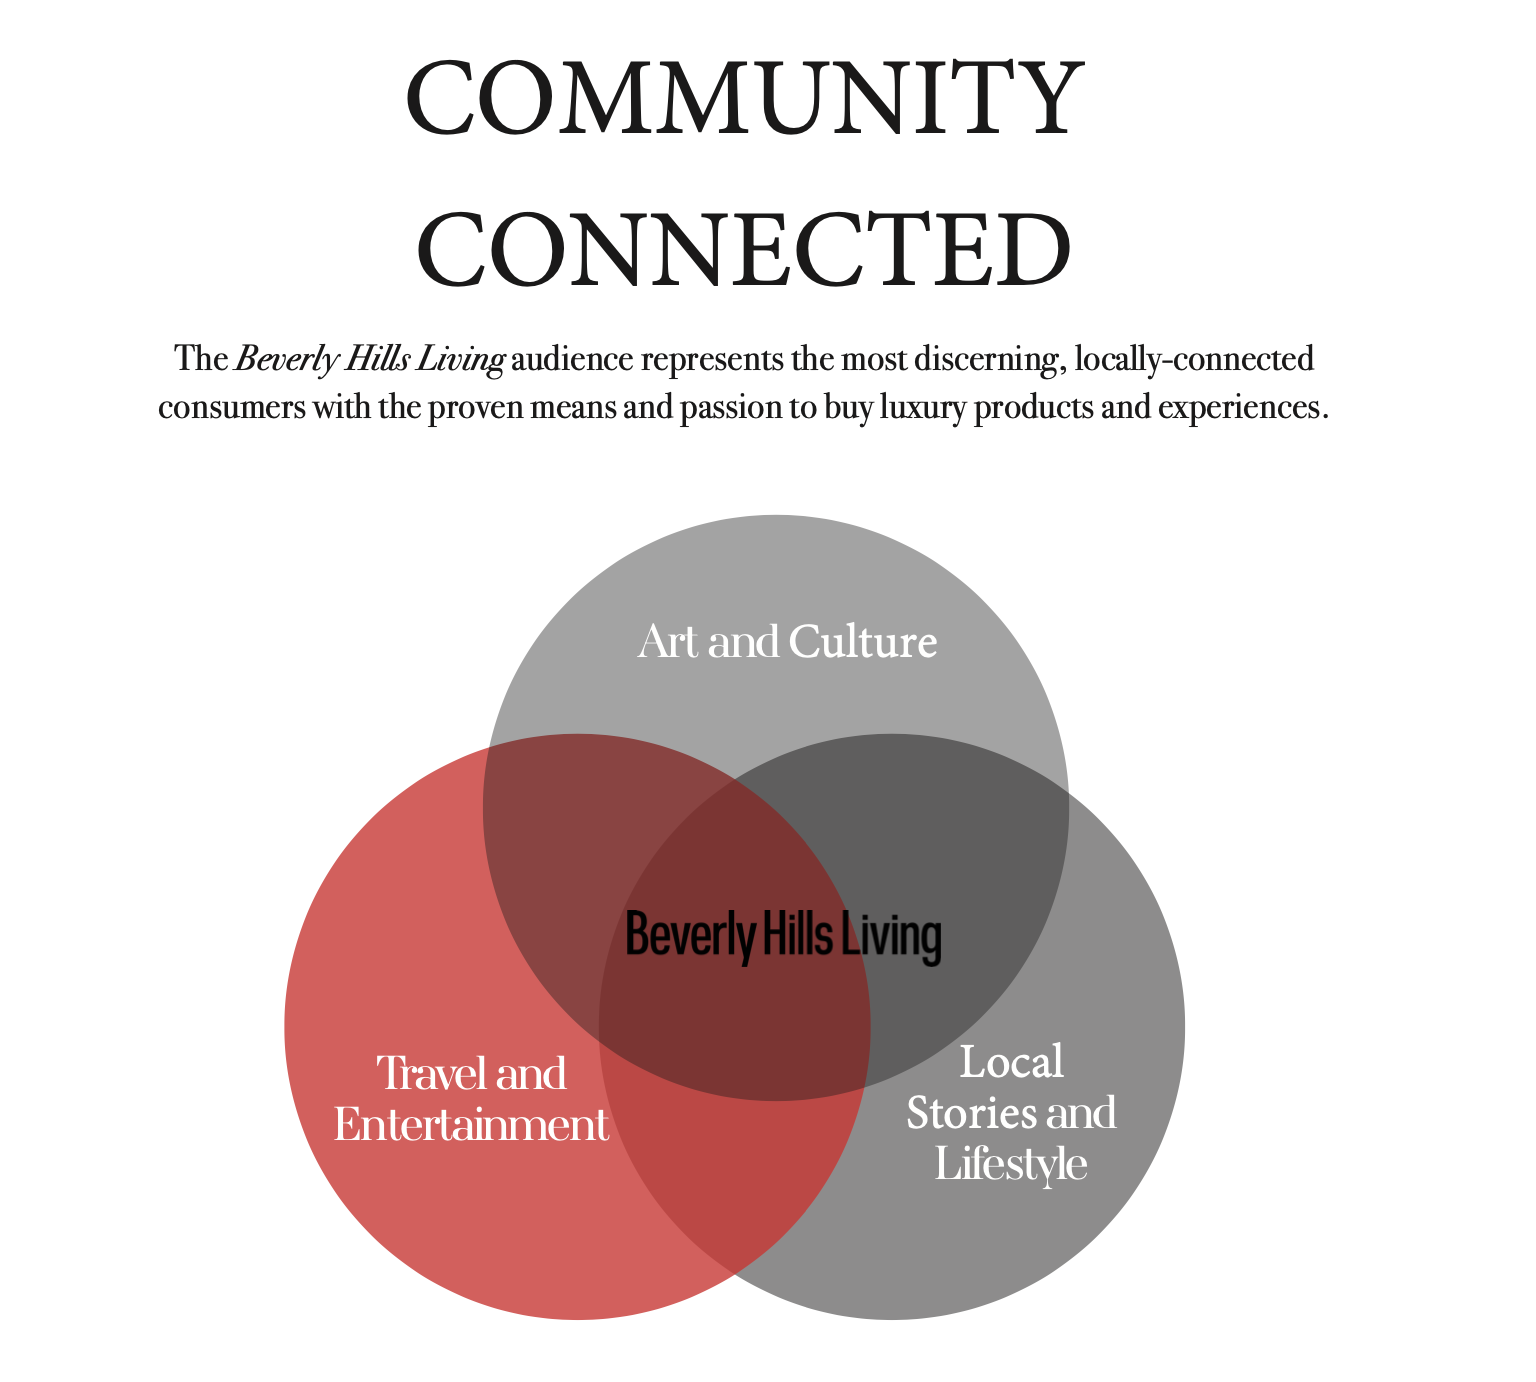 Community Connected